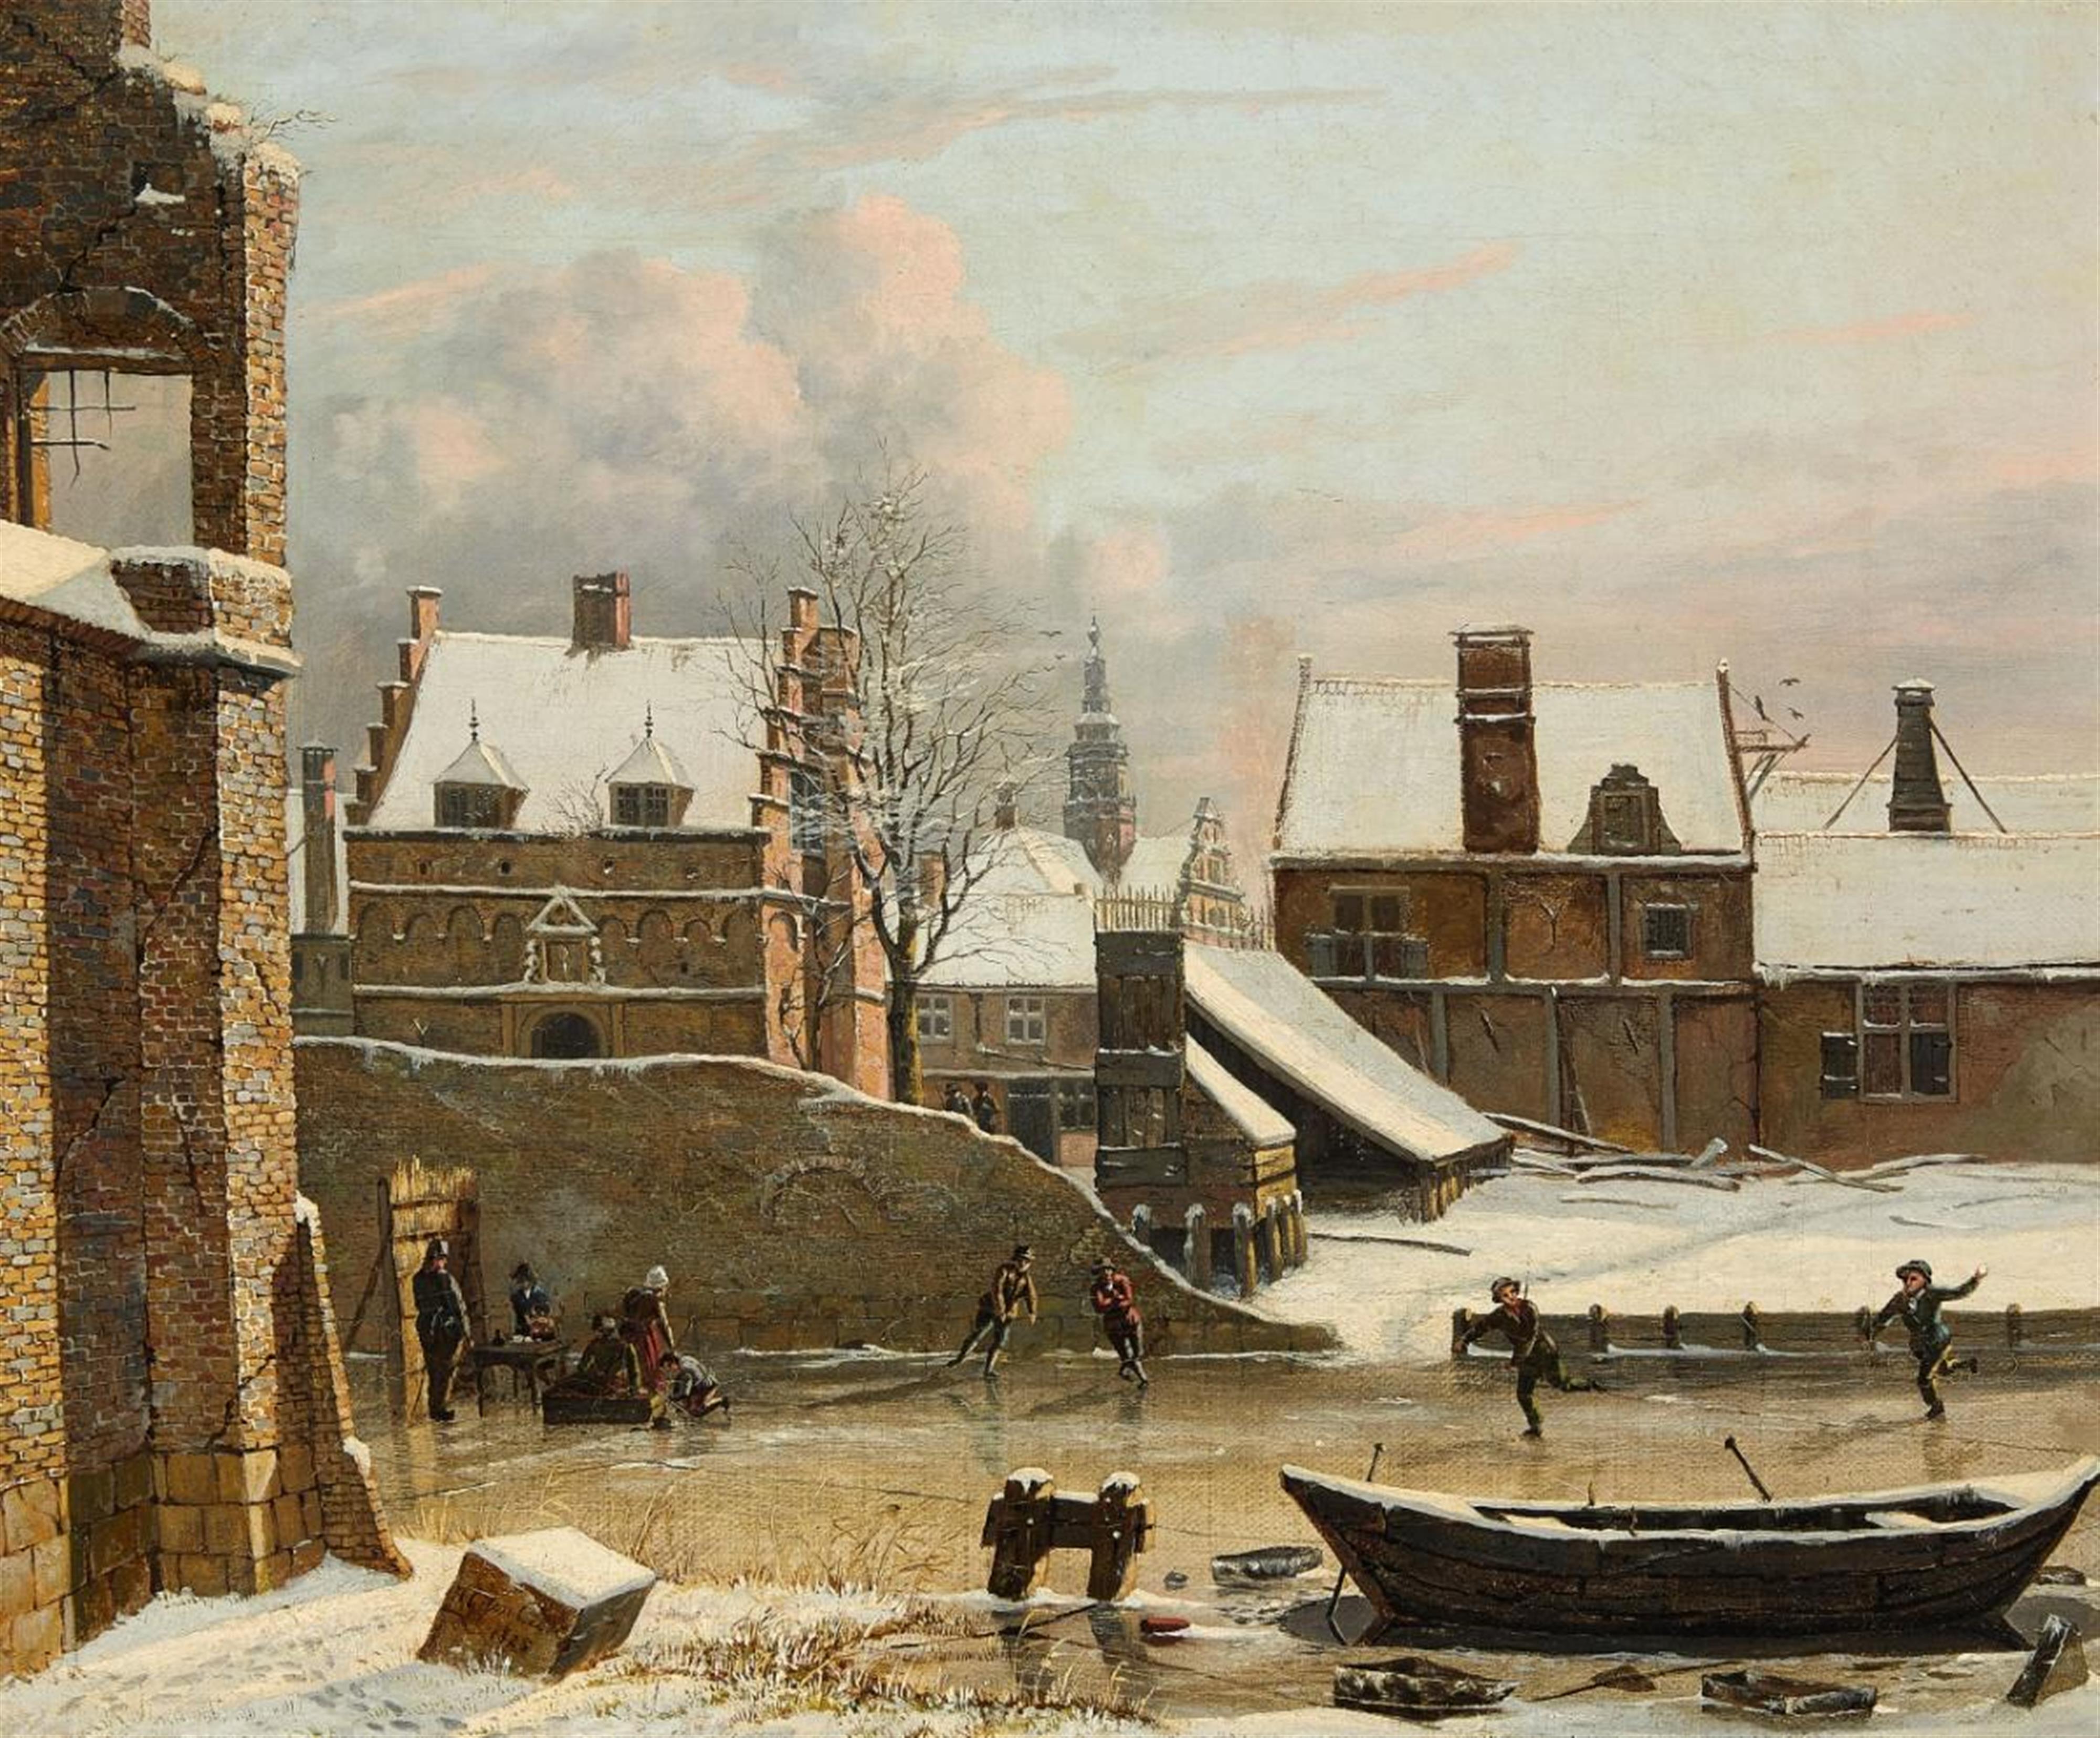 Hendrik Gerrit Ten Cate - View of a City in Winter with Ice Skaters - image-1